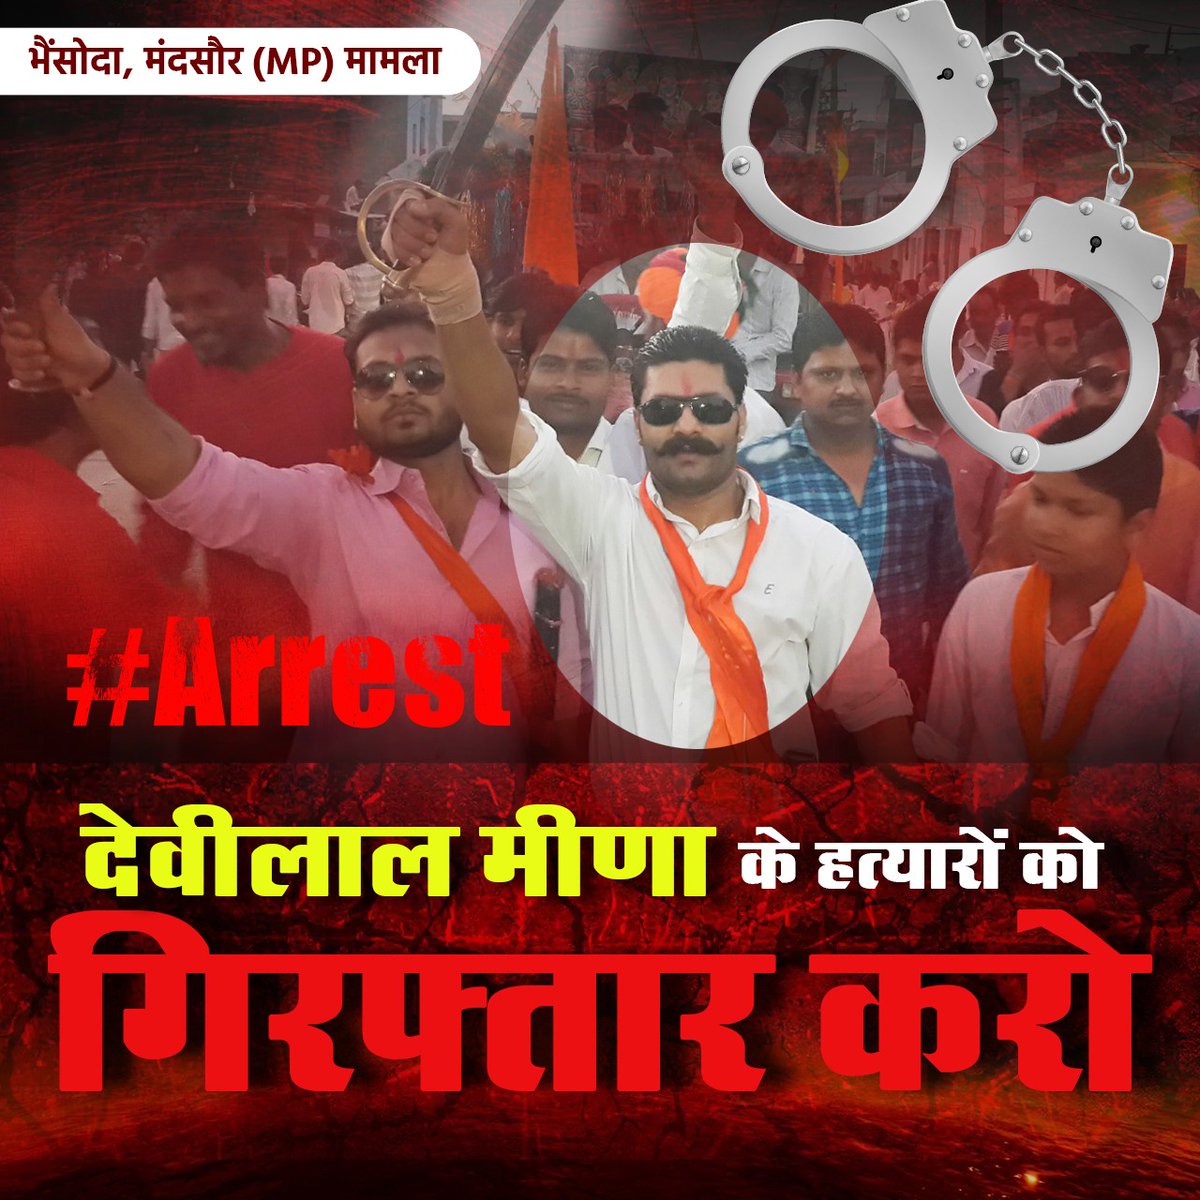 RT @Dasimp75: #Arrest_BajrangDal_Goons
Those who defended Hindutva opened fire on Hindu brother.

 https://t.co/3KT4wfAQpE